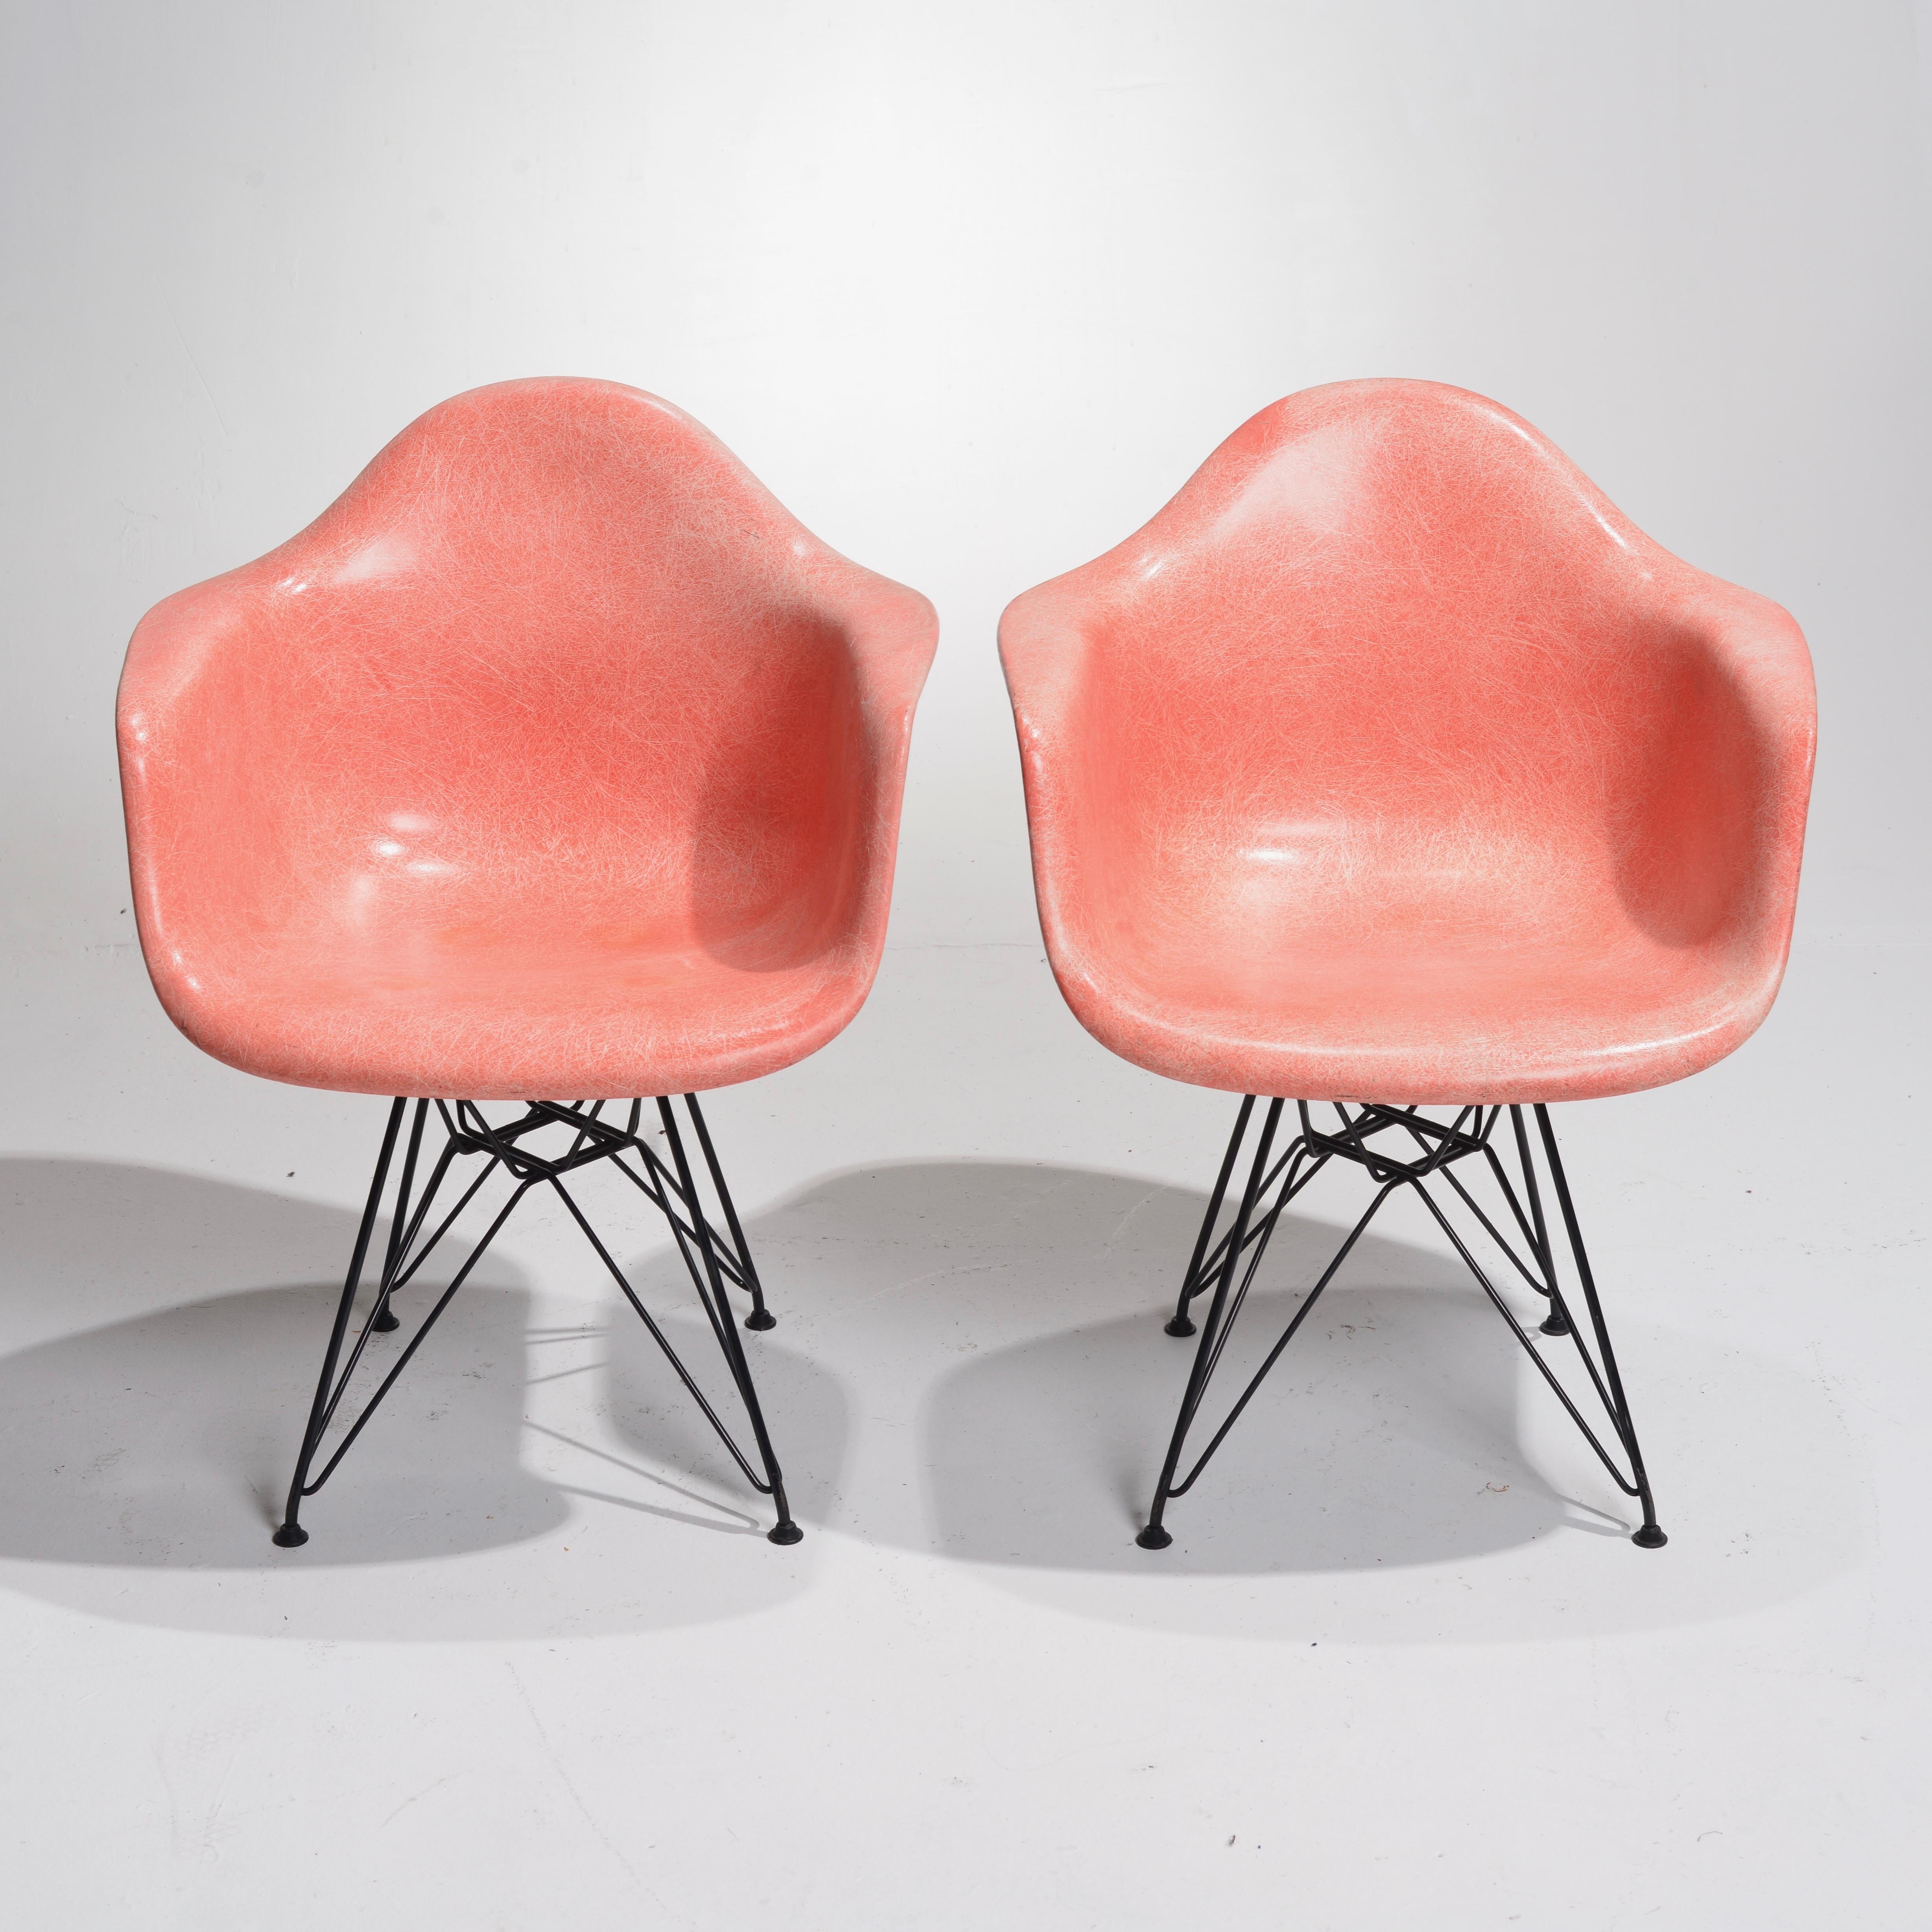 Zenith Charles Eames DAR Fiberglass Shell Chairs For Sale 1